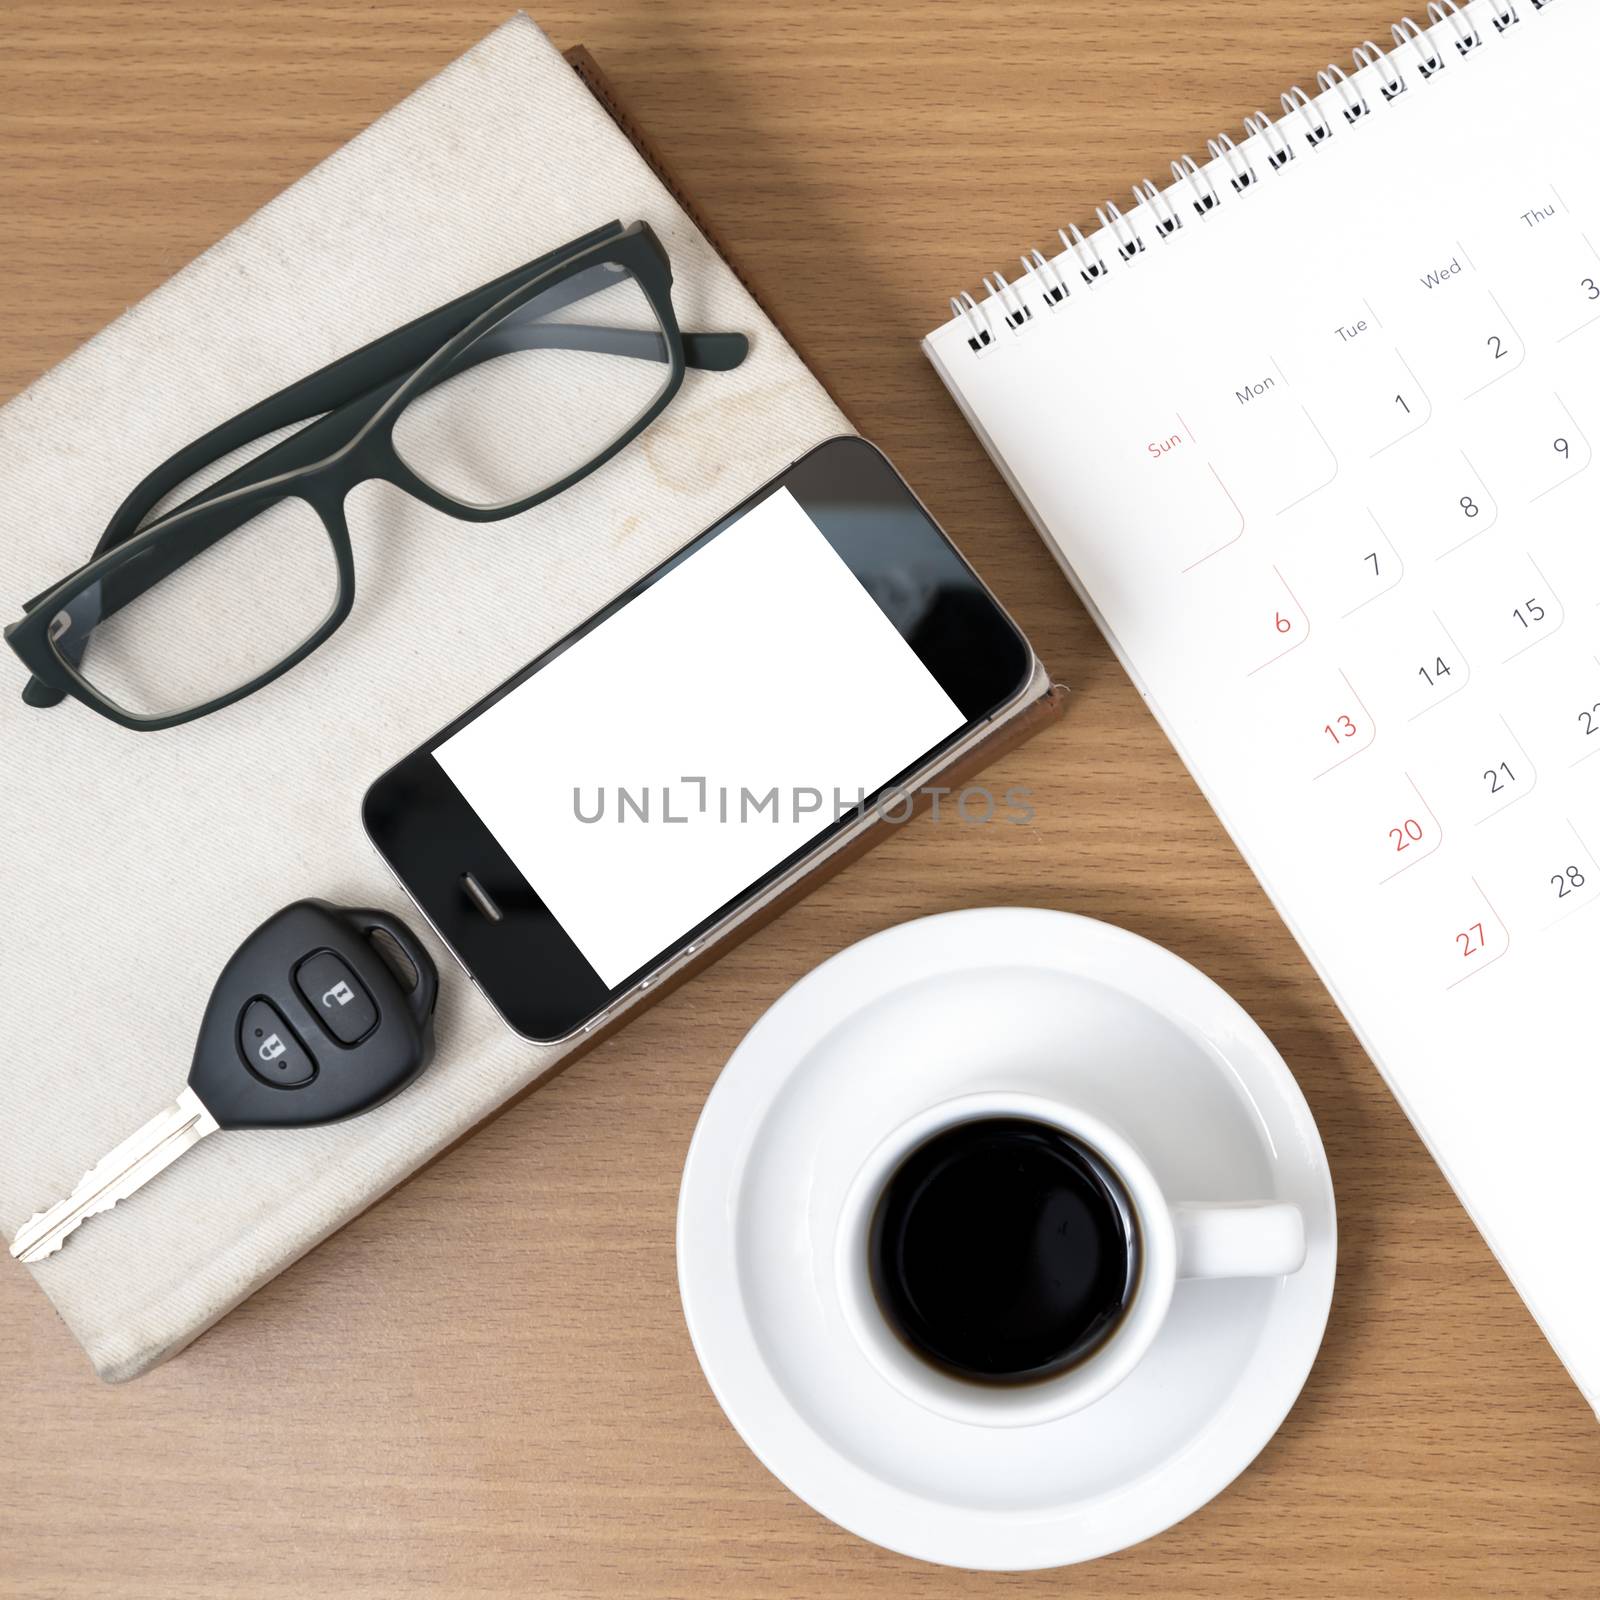 coffee and phone with car key,eyeglasses,stack of book,calendar by ammza12